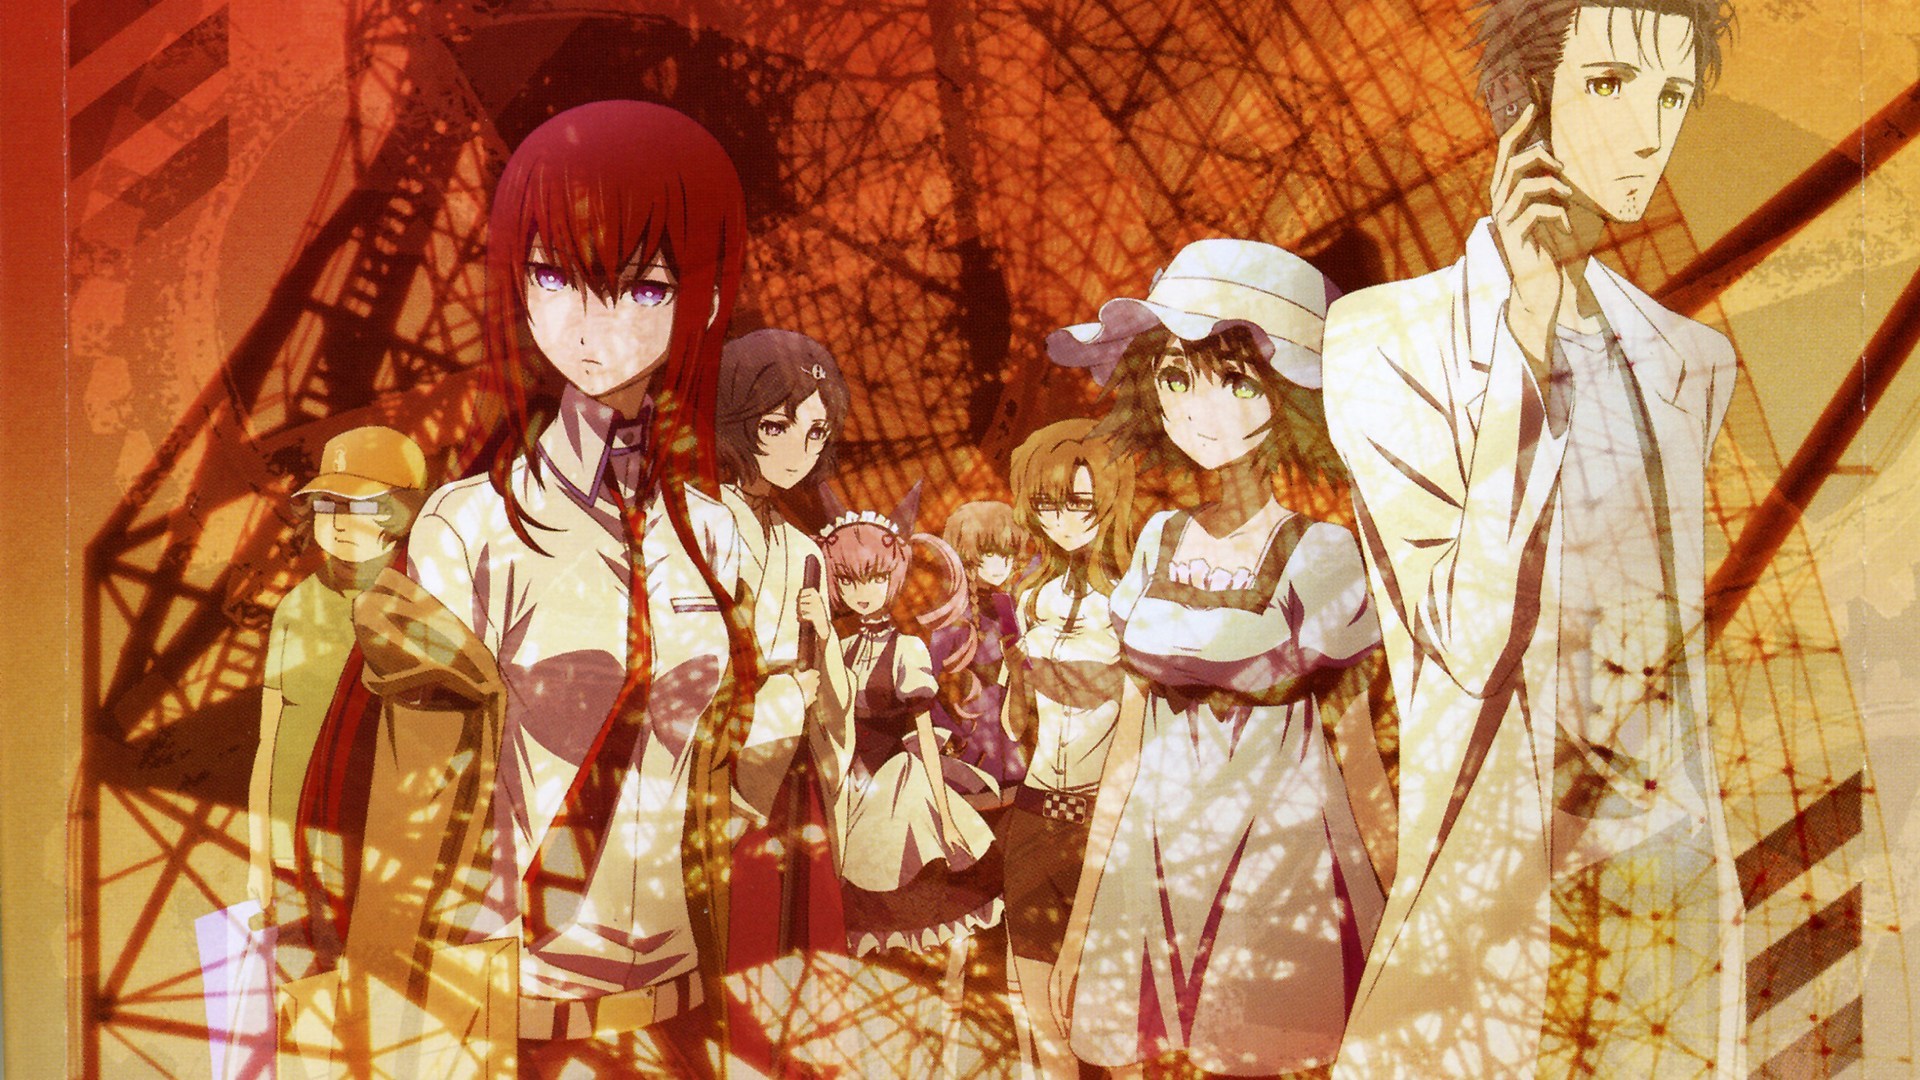 Wallpapers from Steins;Gate gamepressure.com